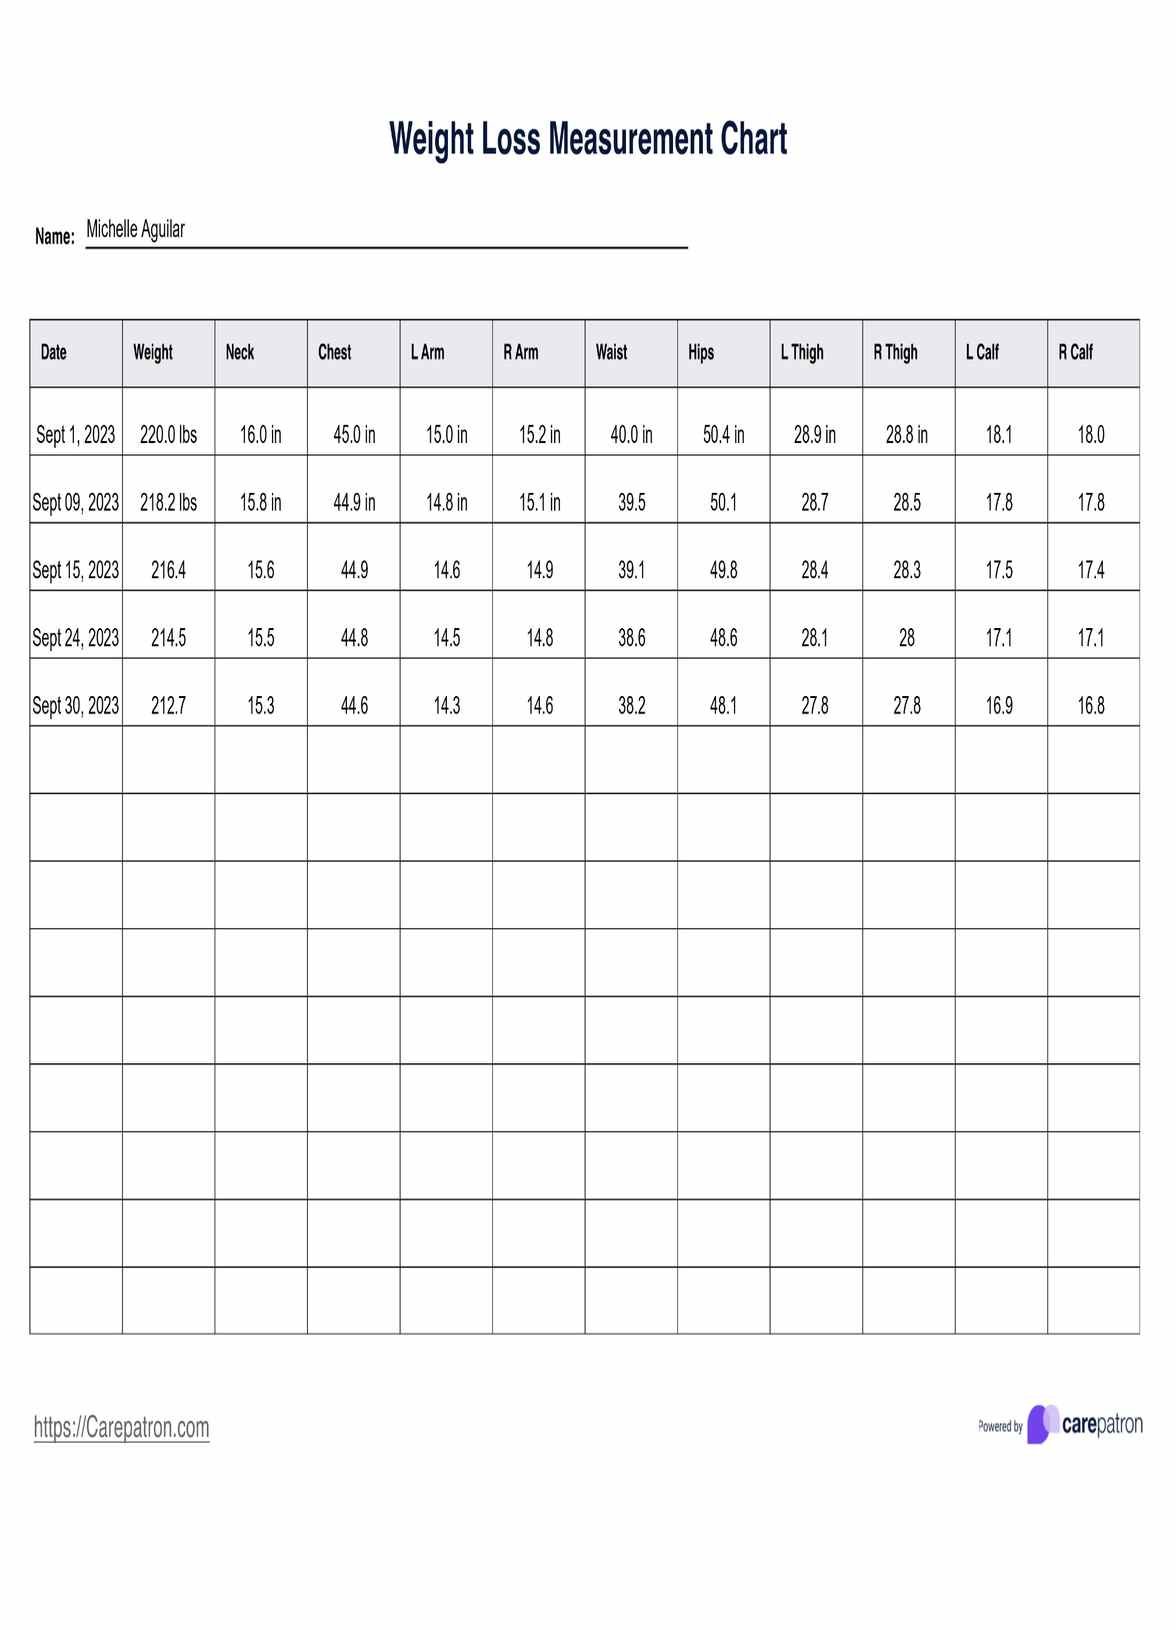 Weight Loss Measurement Chart PDF Example